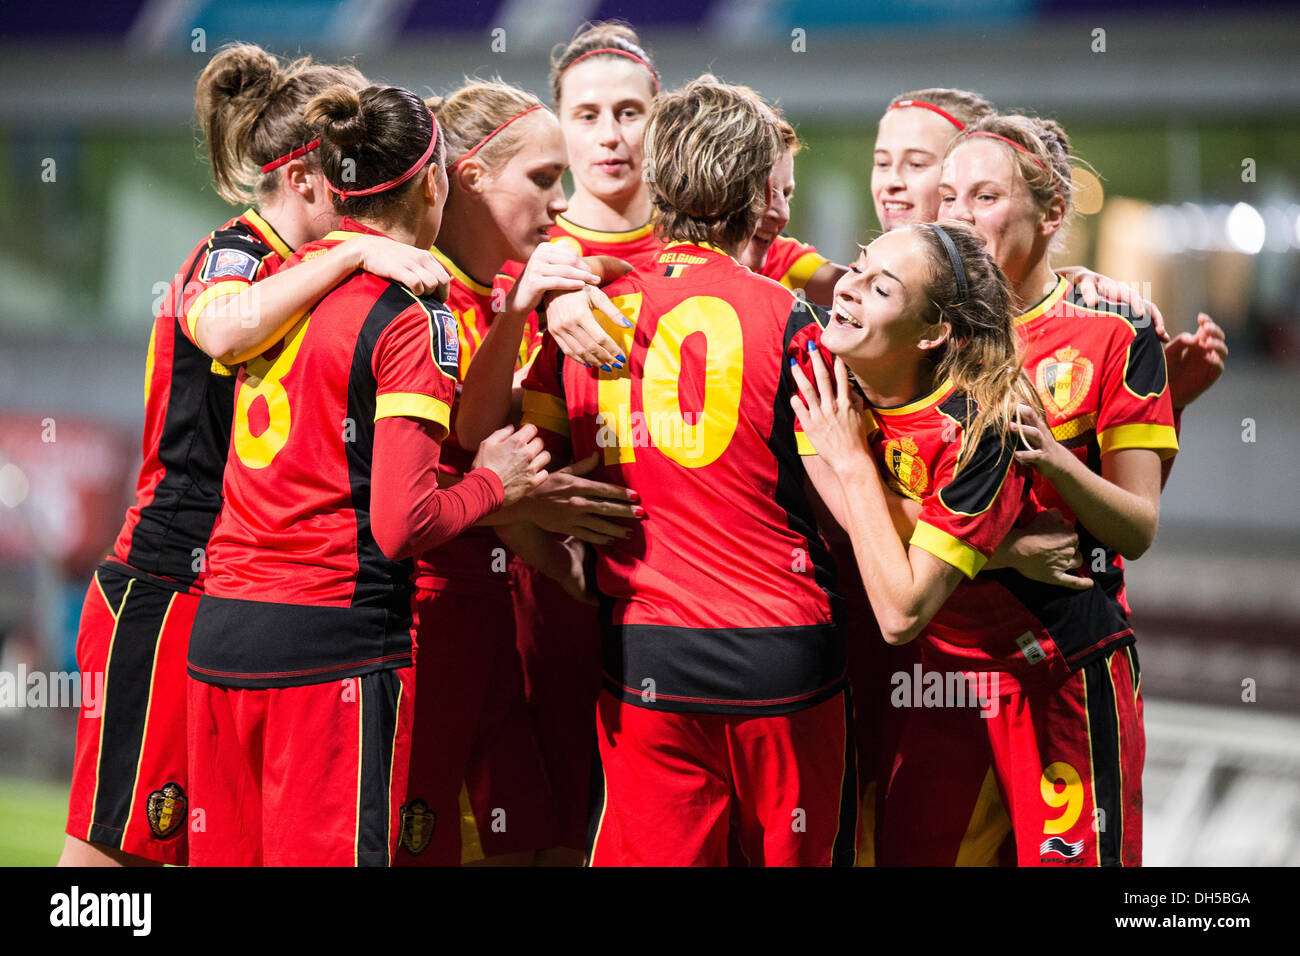 Antwerpen, Belgium. 31th October 2013. Belgium national team celebrating the 3-1 score after a goal from Belgium player Aline Zeler(red #10) in qualifying group stage game between Belgium and Portugal Credit:  Ruben Lamers/Alamy Live News Stock Photo